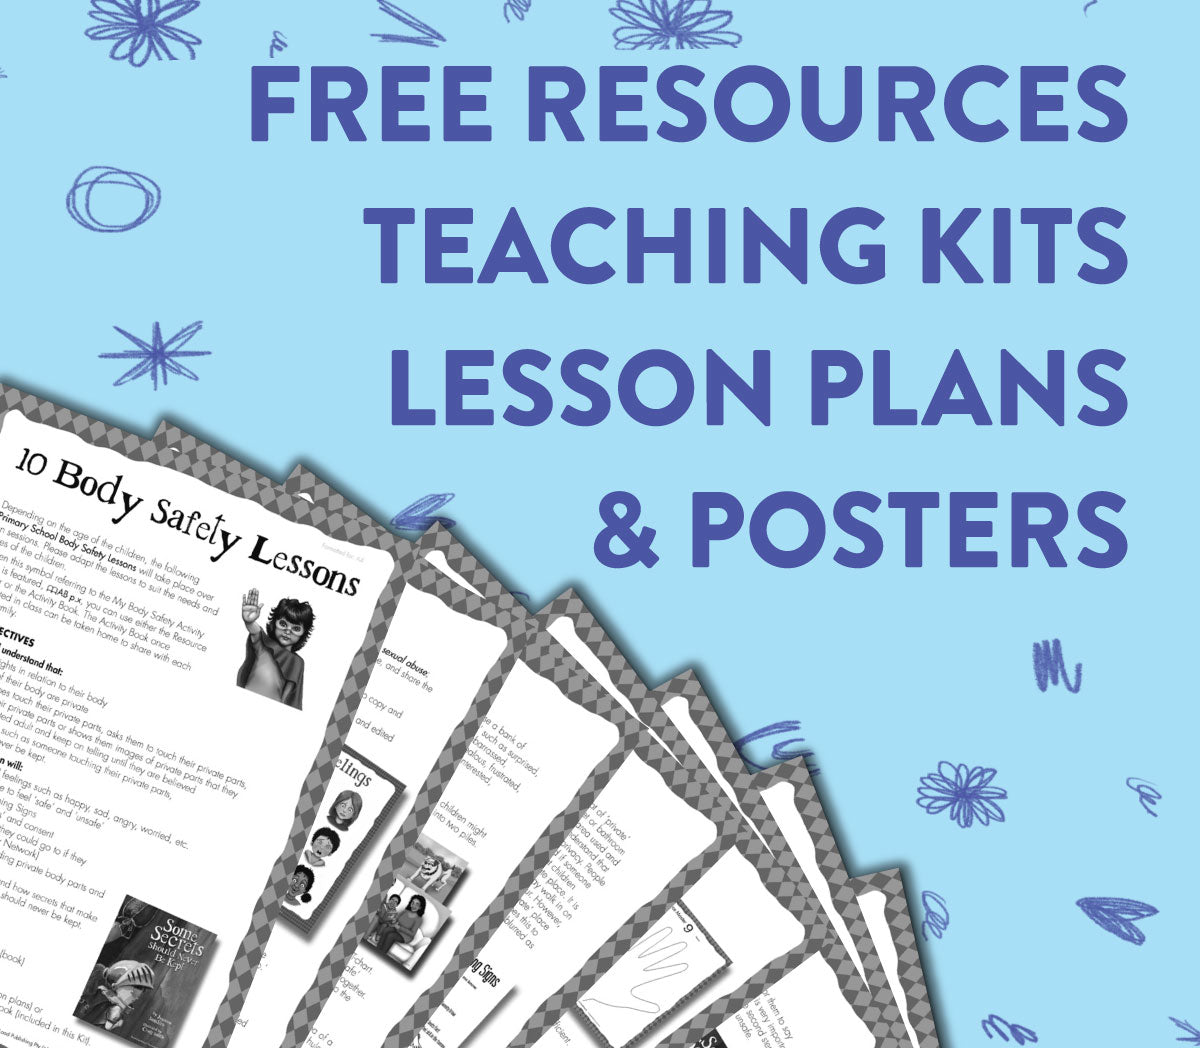 A promotional banner showcasing the teaching kits, lesson plans, posters and free resources available on Educate2Empower's website.